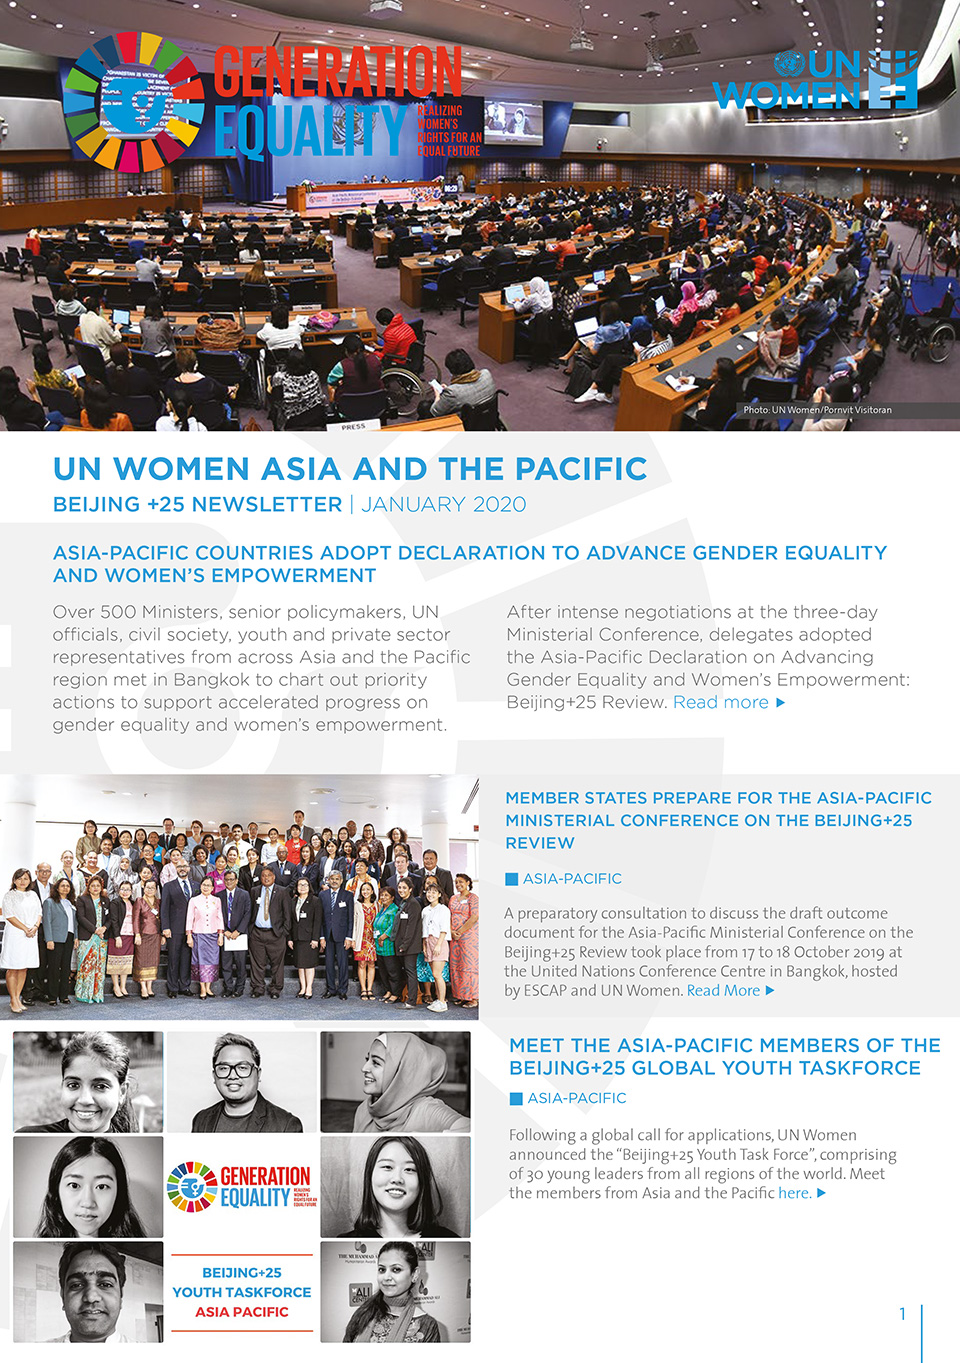 COVER: UN Women asia and the Pacific Beijing +25 Newsletter | JANUARY 2020